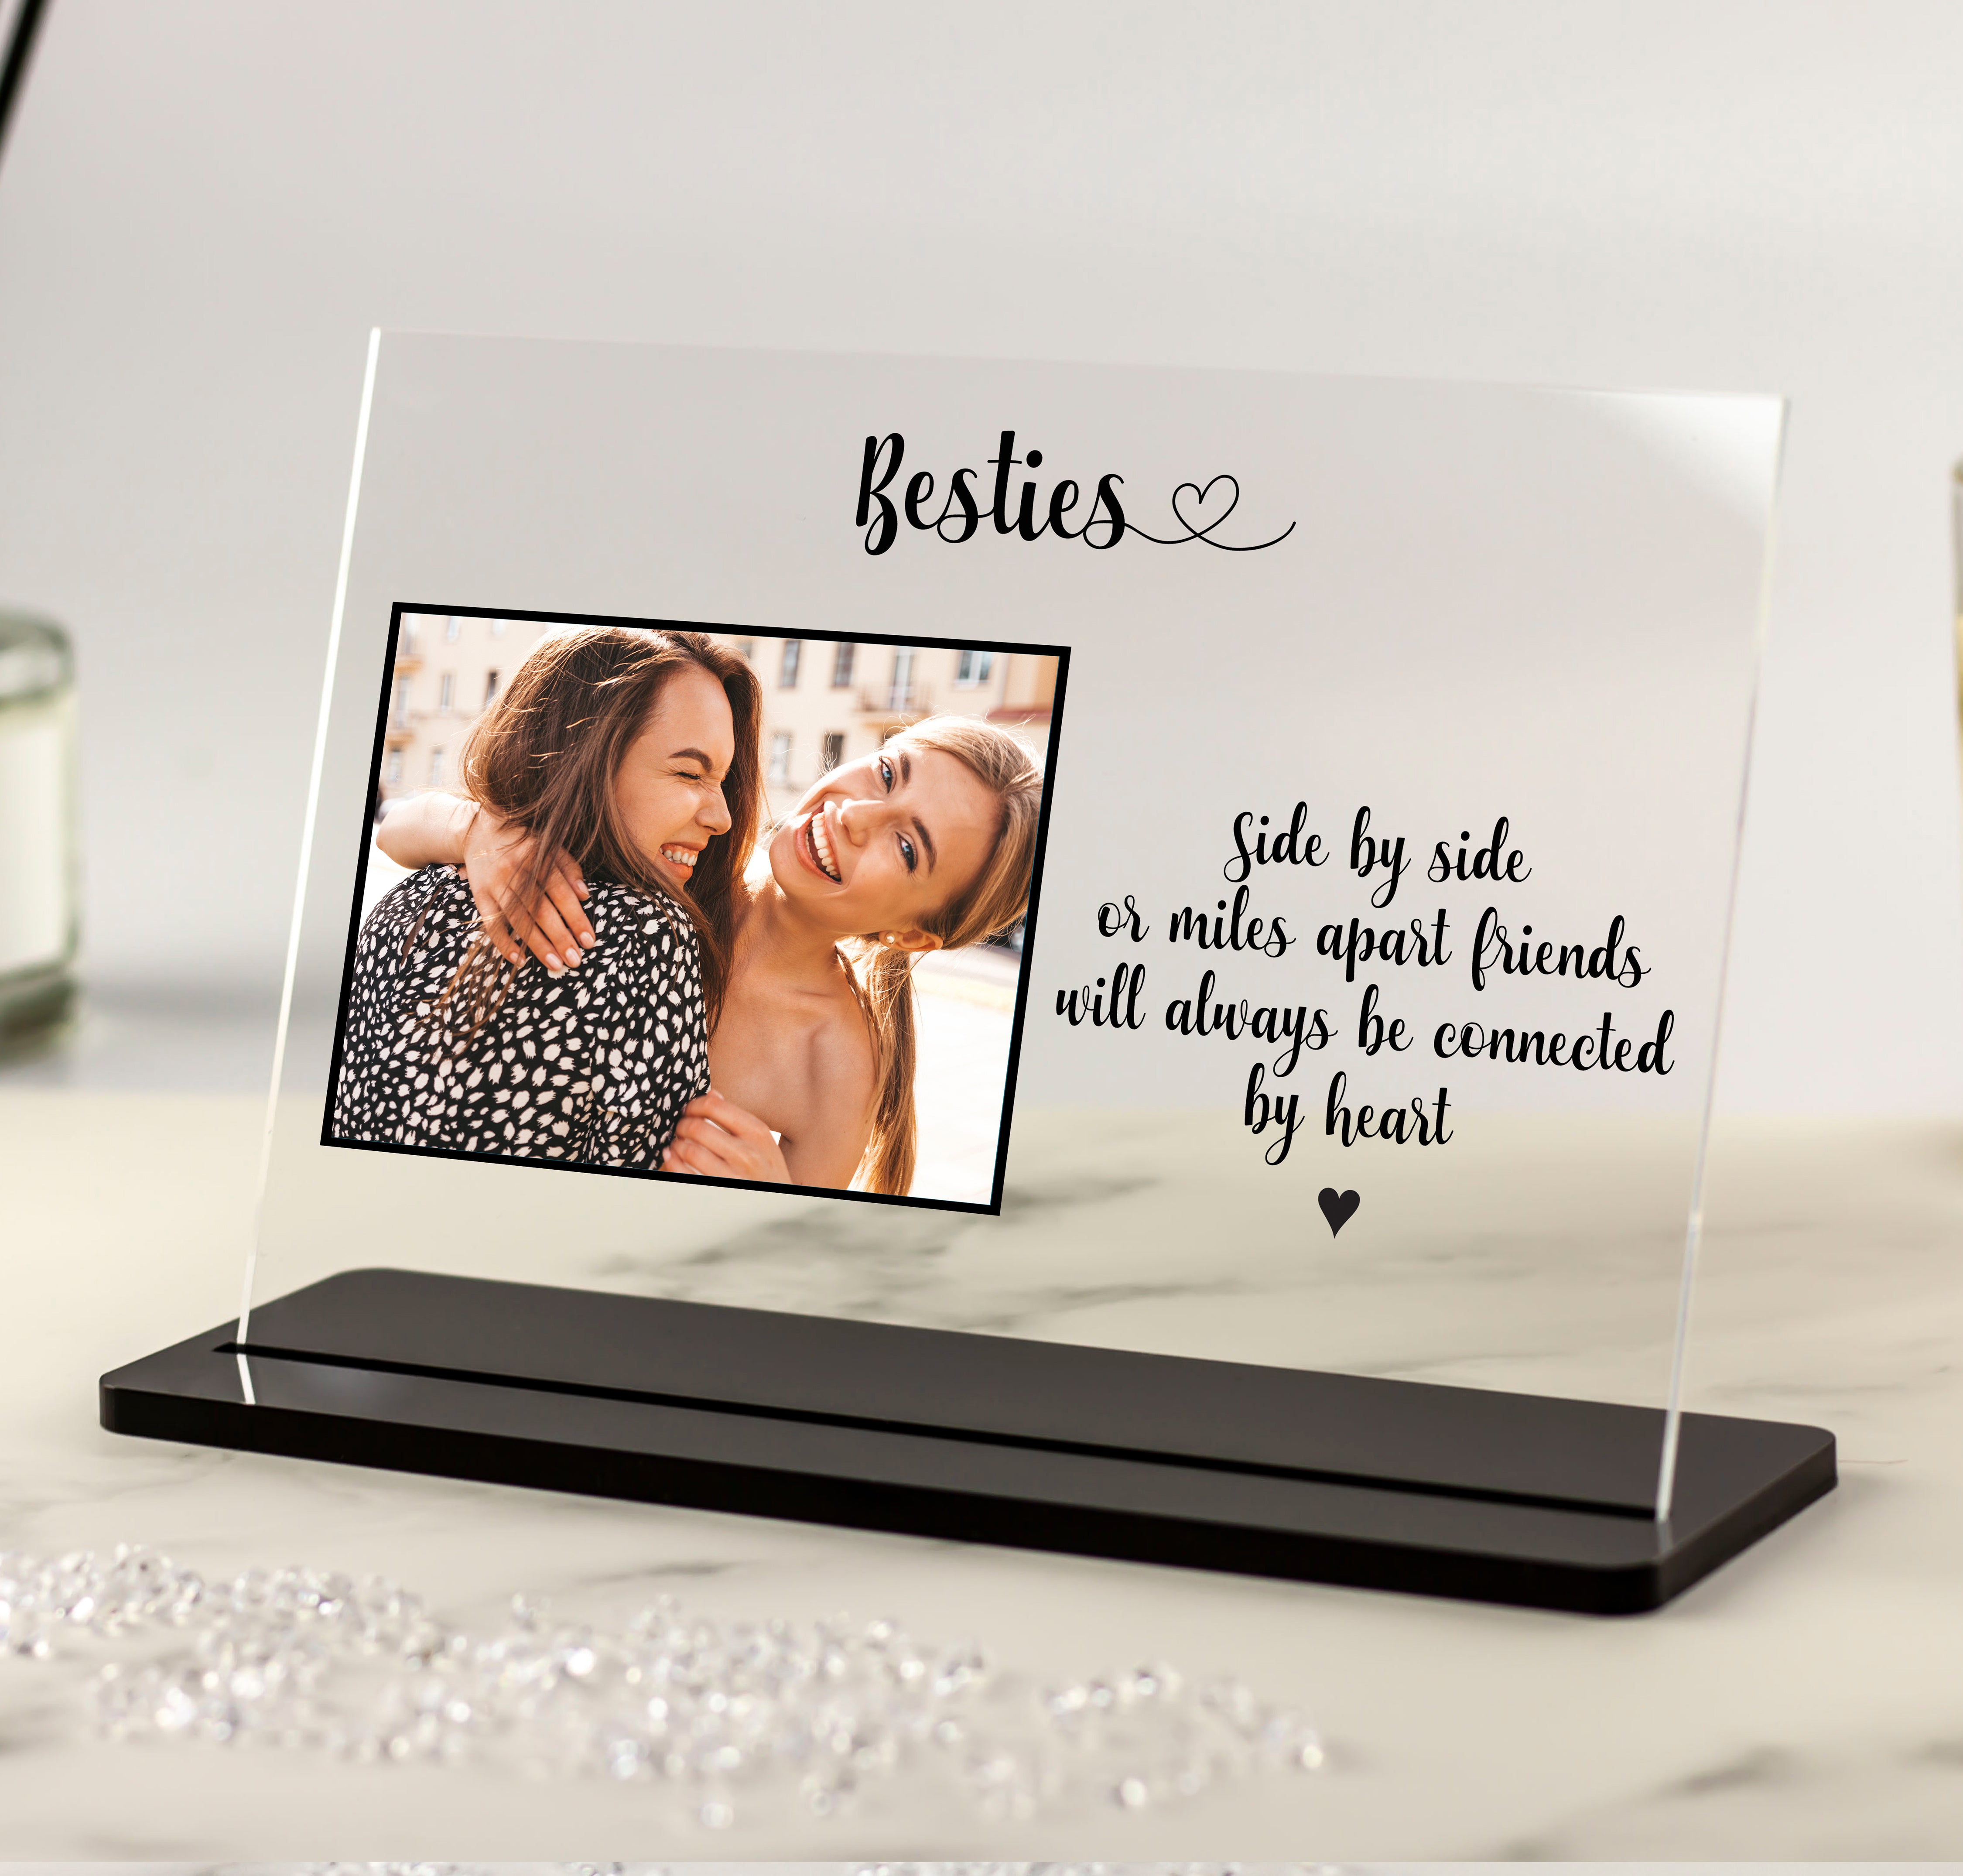 Bestie Gifts: Celebrating Friendship with Custom Acrylic Plaques